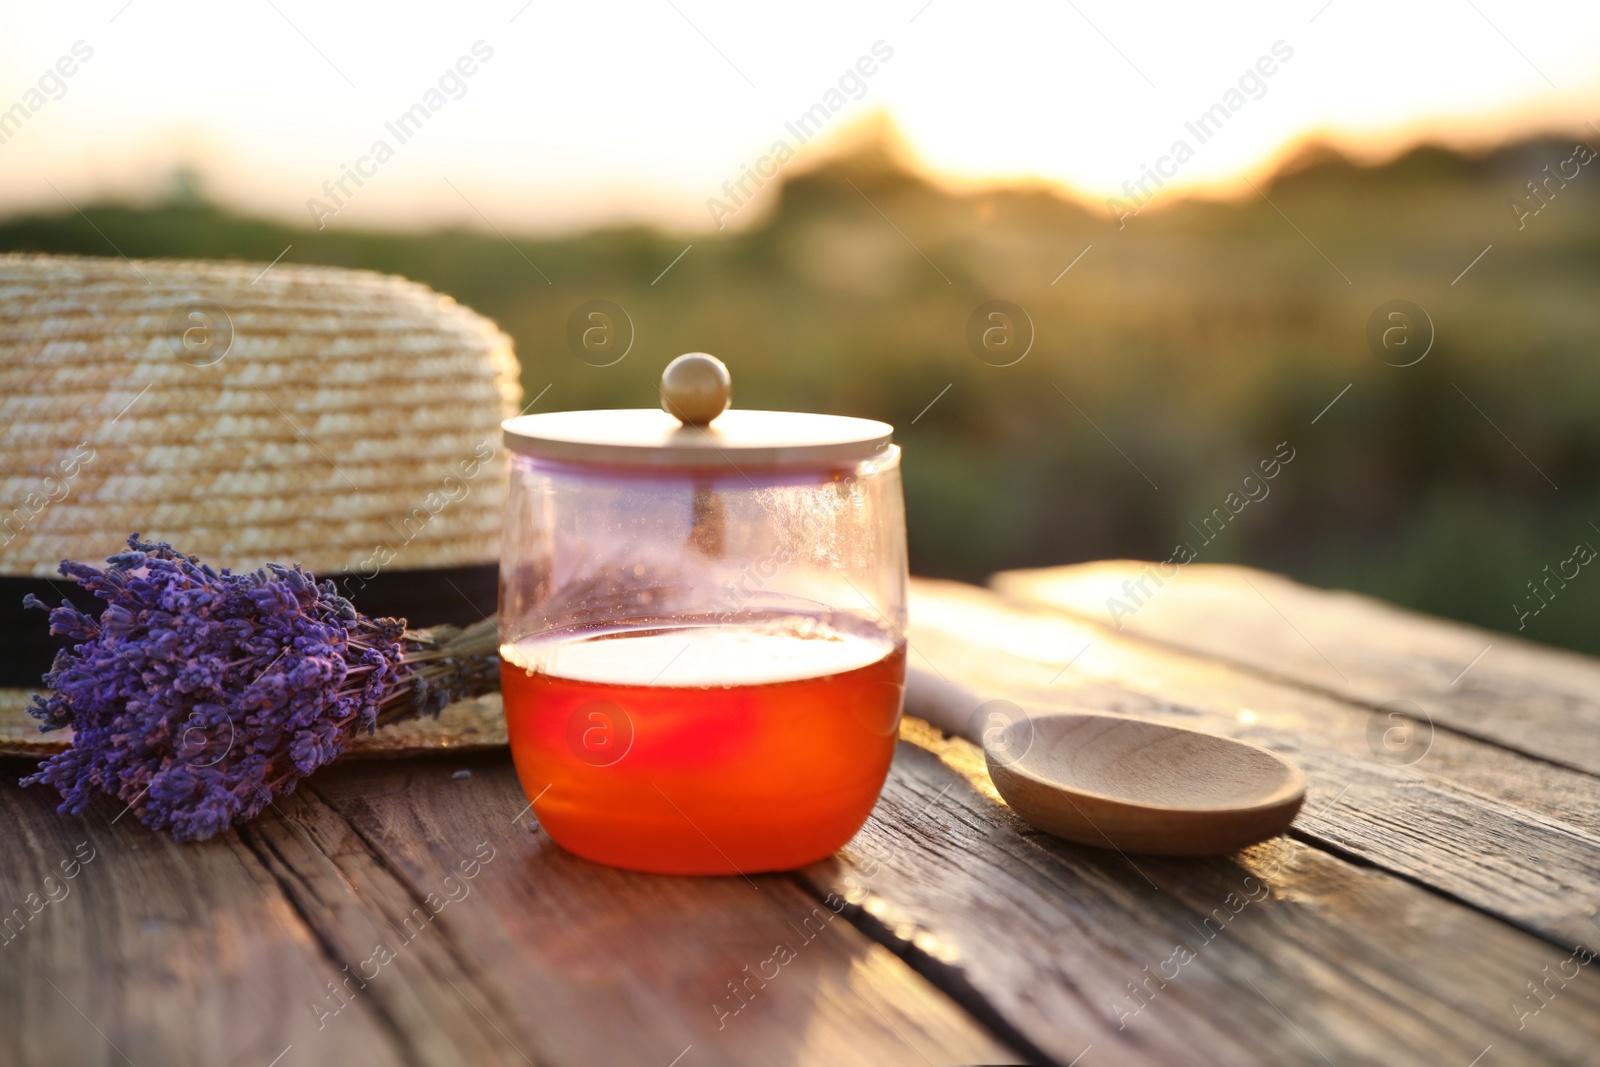 Photo of Jar with fresh honey and lavender flowers on wooden table outdoors